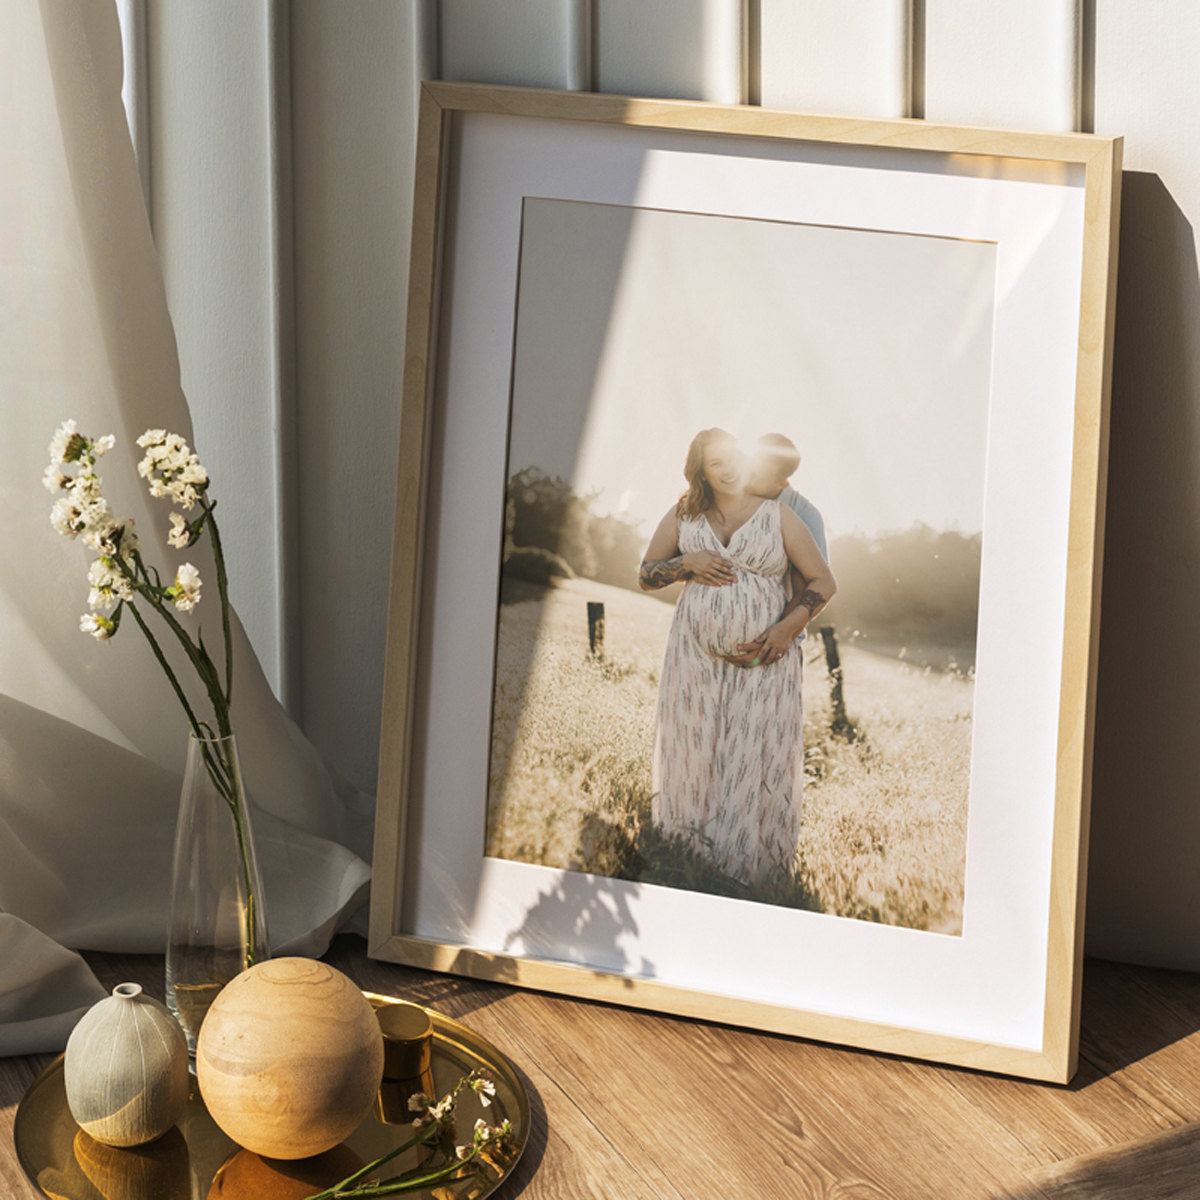 Custom framing offered by your photo lab at the time your print is ordered